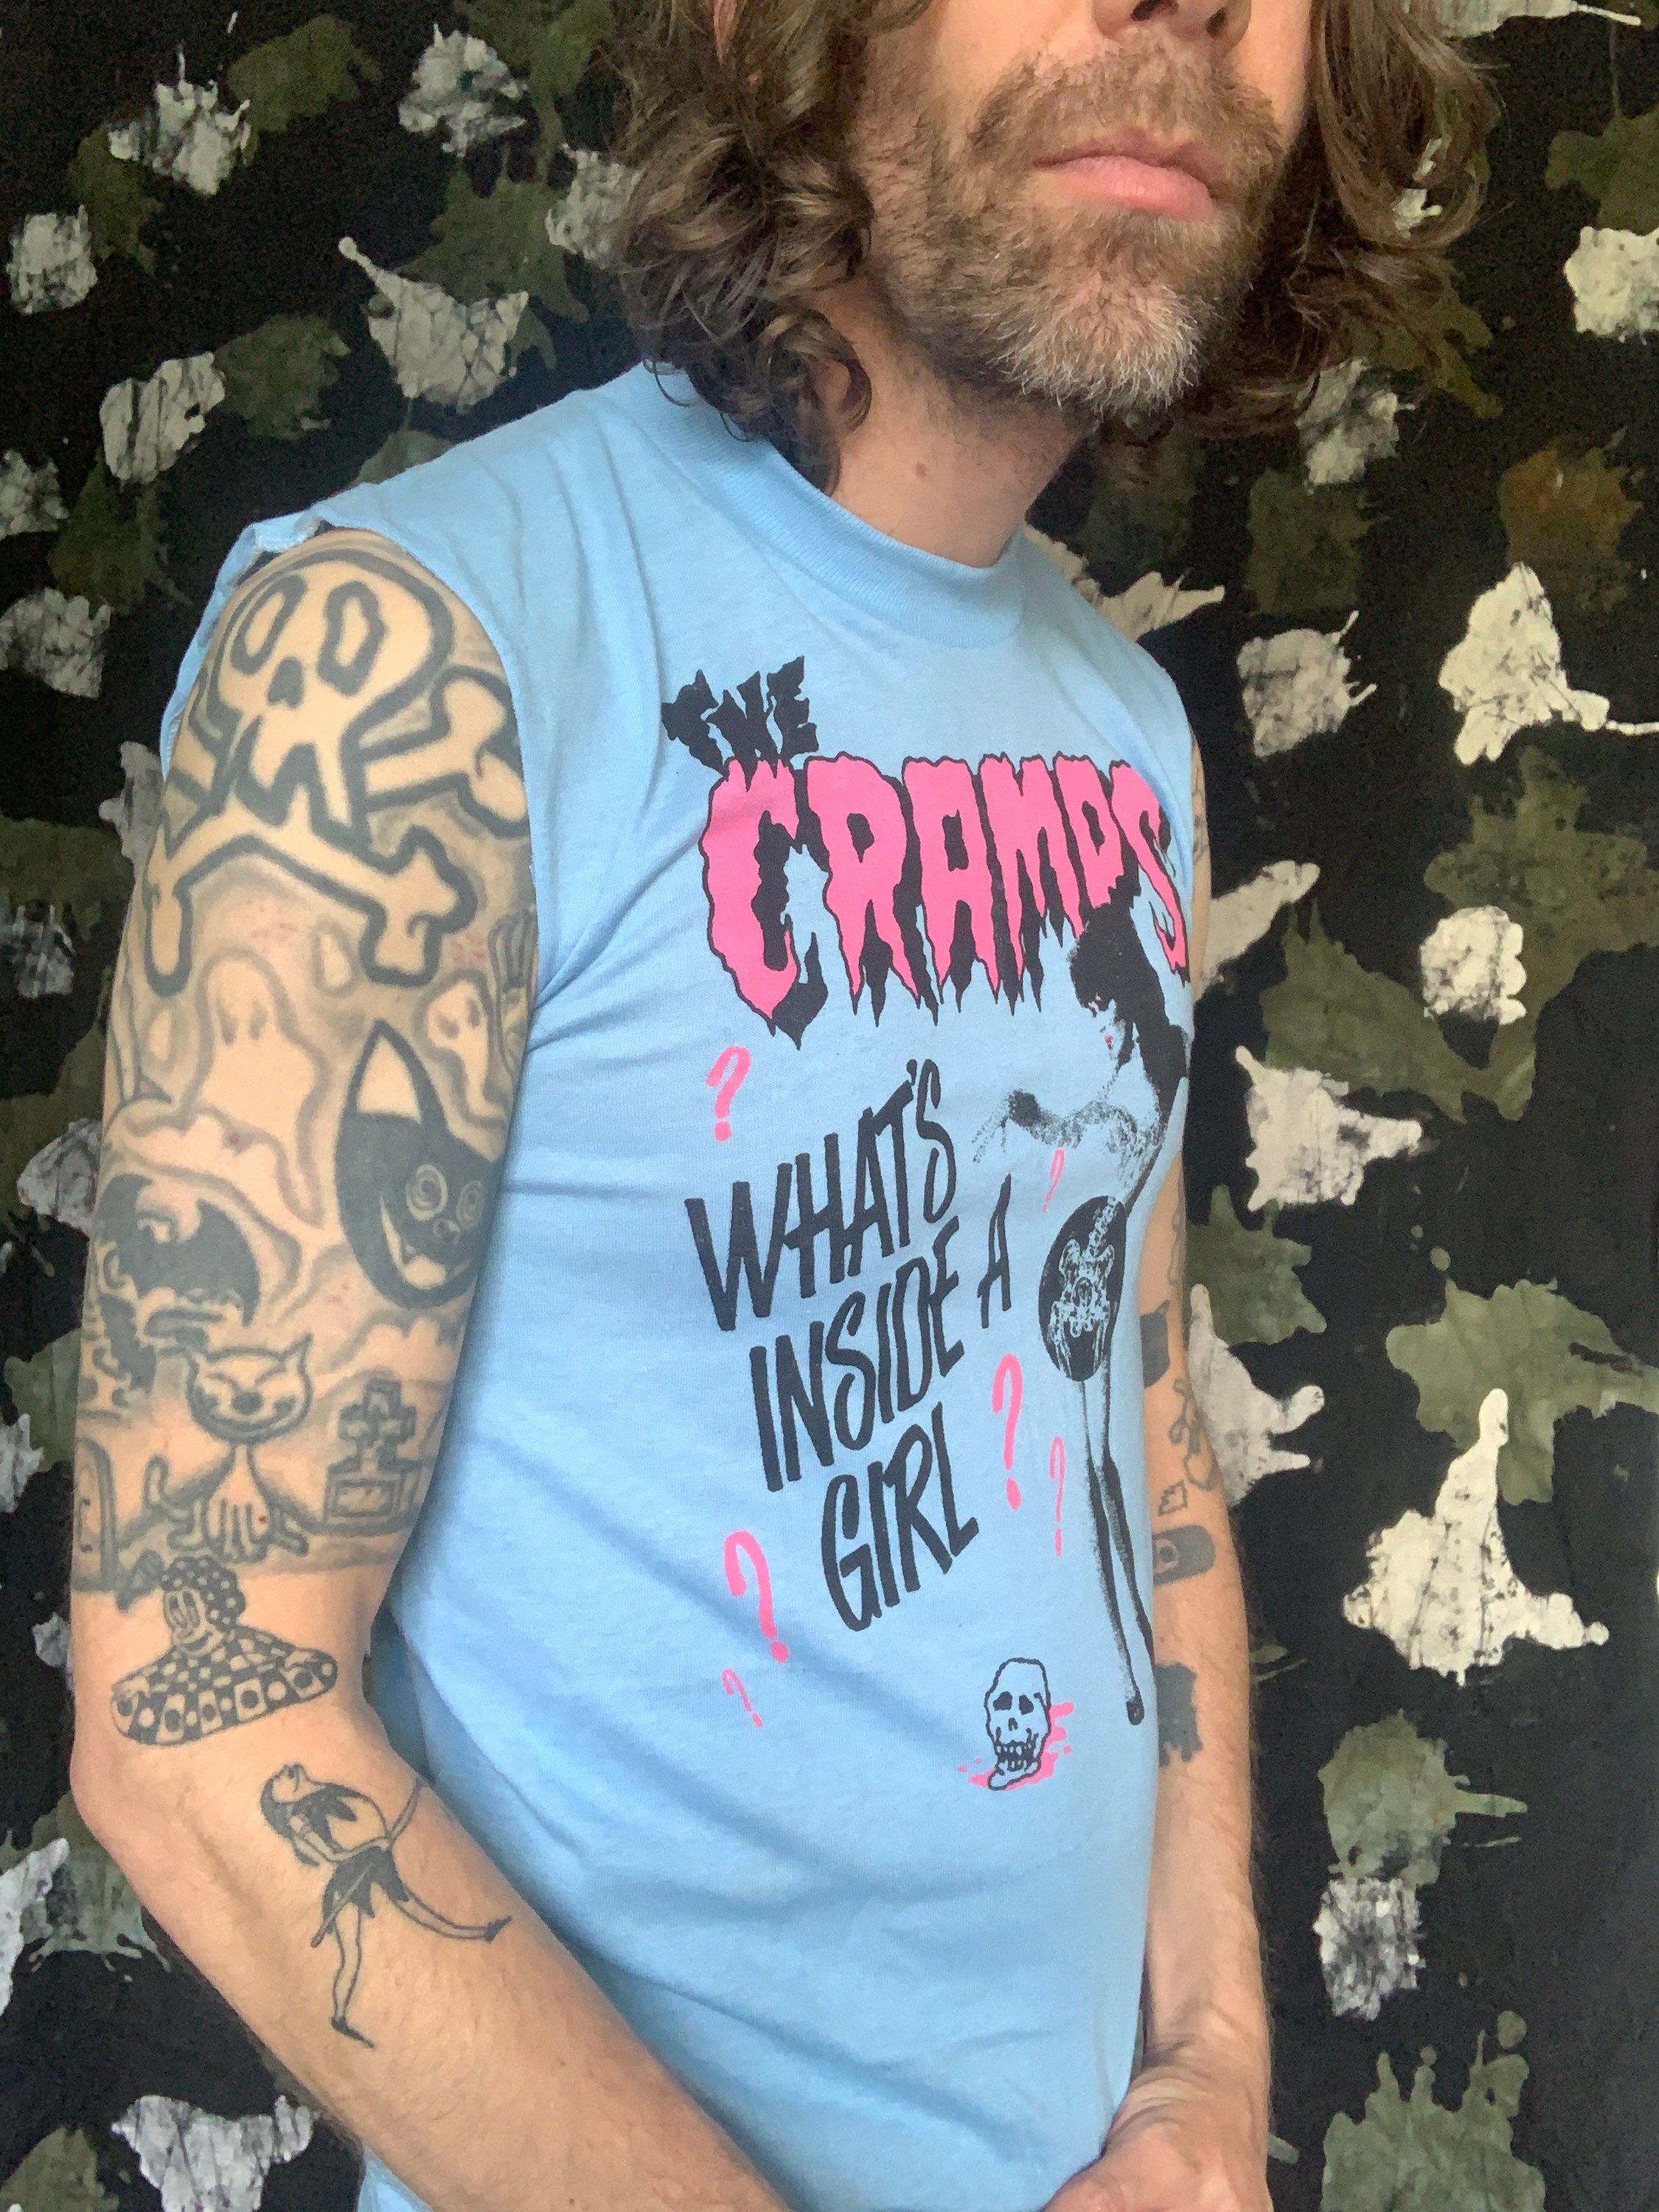 Discover 80's The Cramps sleeveless T shirt